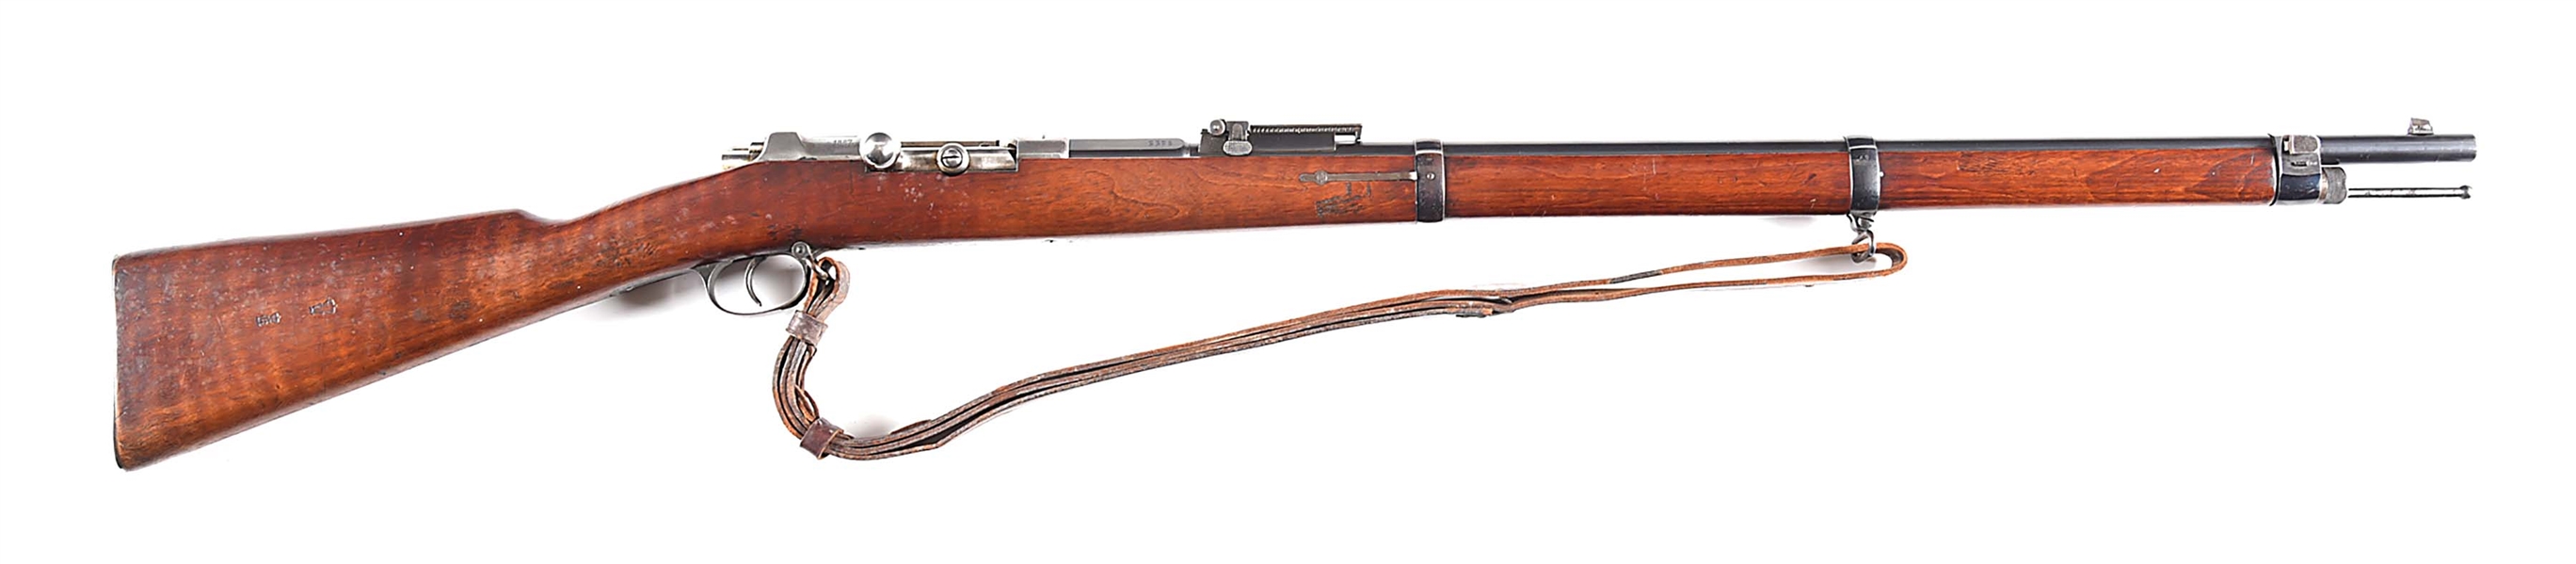 (A) ESPECIALLY FINE UNIT MARKED AMBERG GEWEHR 1871/74 MAUSER BOLT ACTION RIFLE.